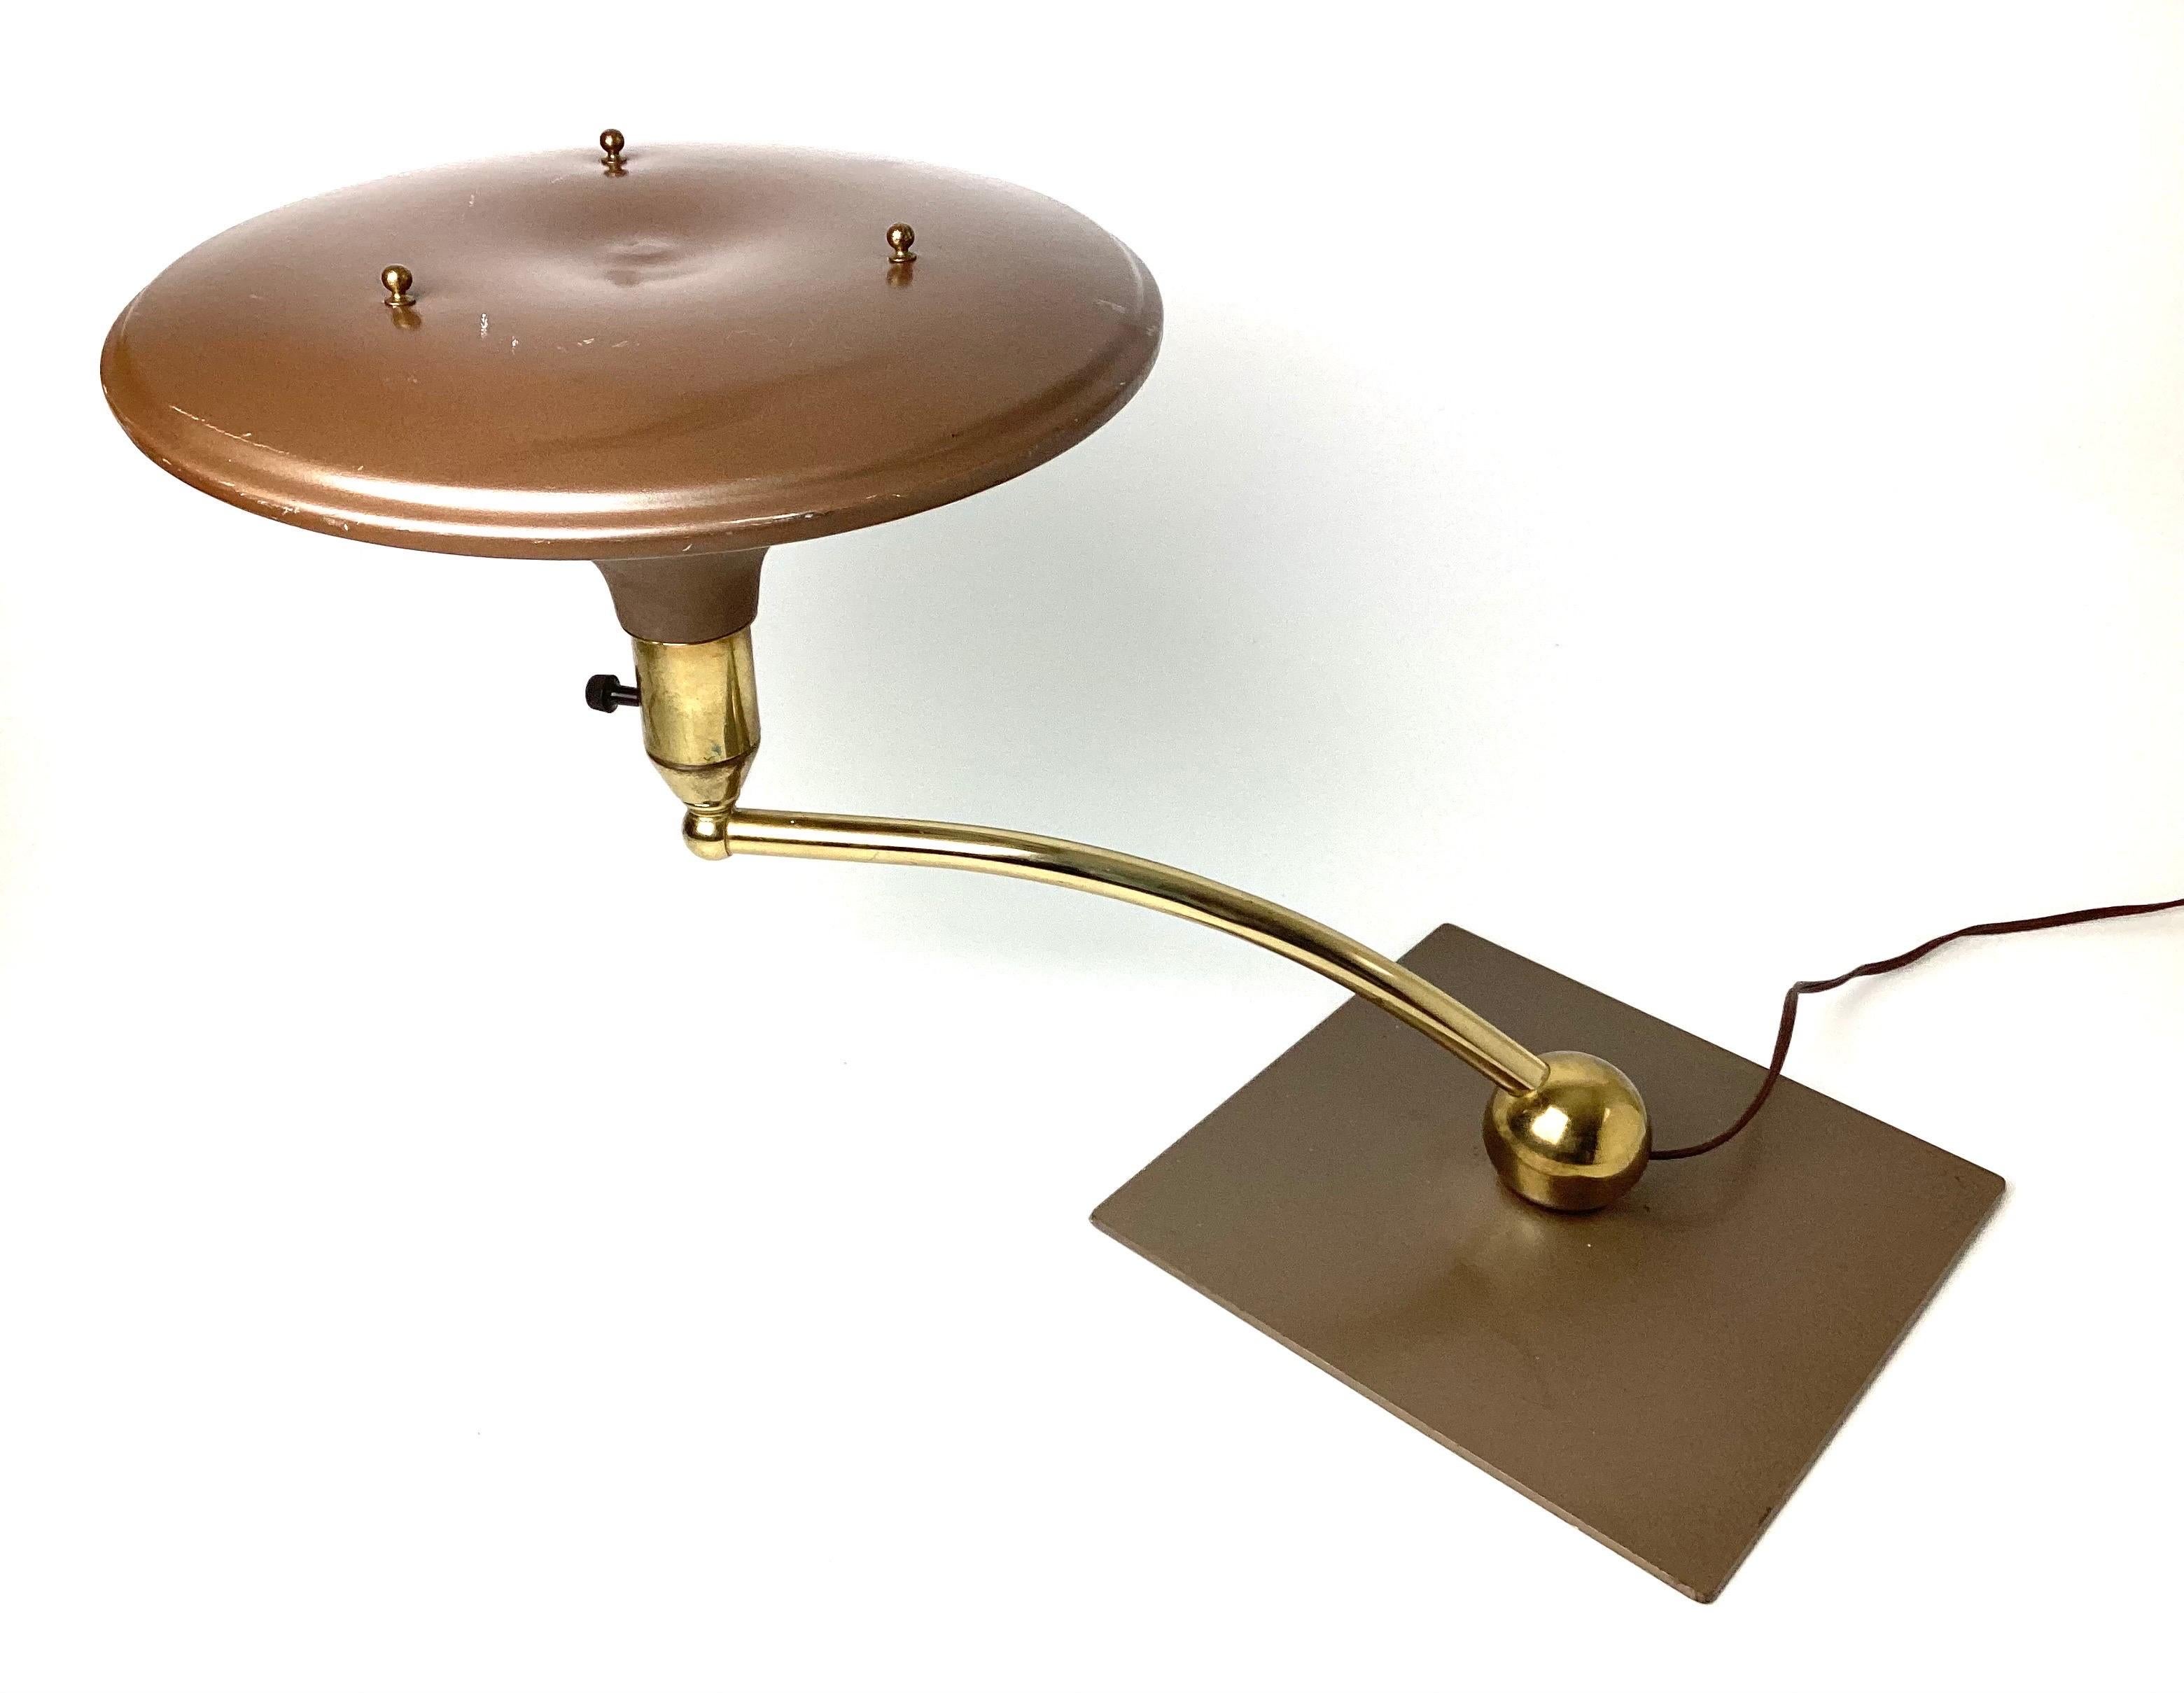 Art Deco 1930s Modern sight light table lamp. Brass with copper baked brown enamel shade and base. Arm swivels. Age appropriate condition with some minor ware to the paint.